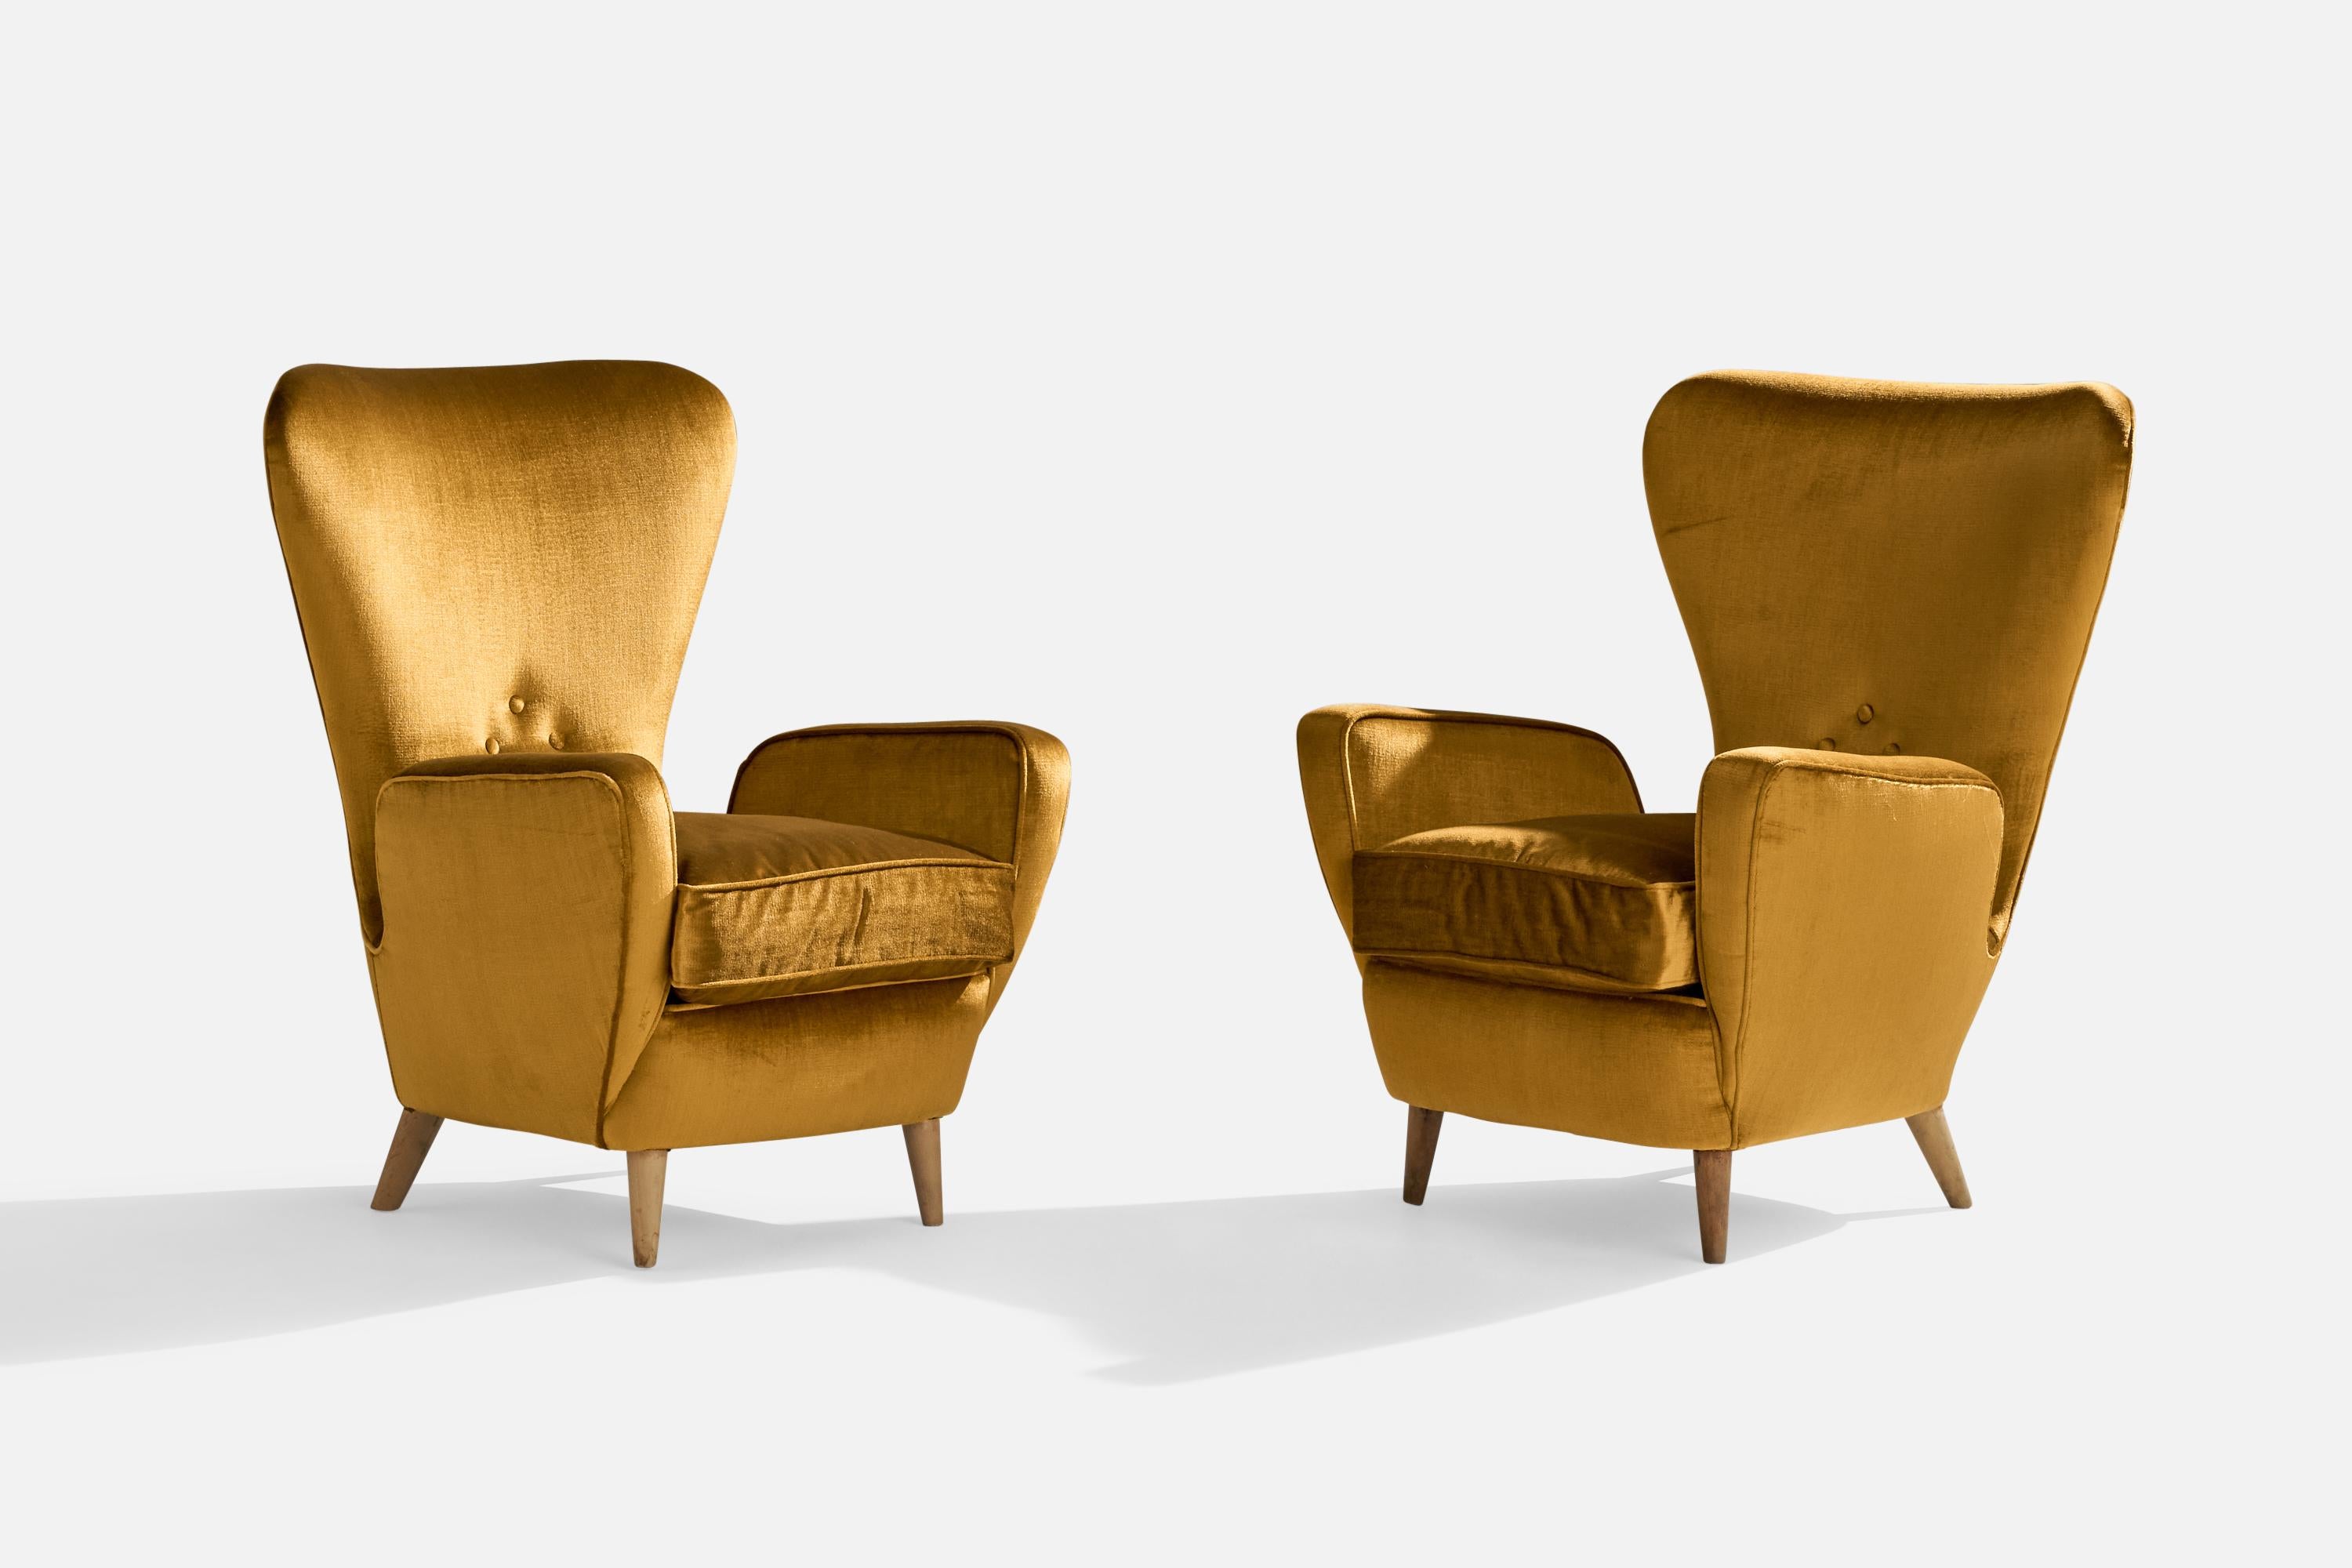 A pair of yellow gold velvet and wood lounge chairs designed and produced in Italy, 1950s.

seat height 17.3”.